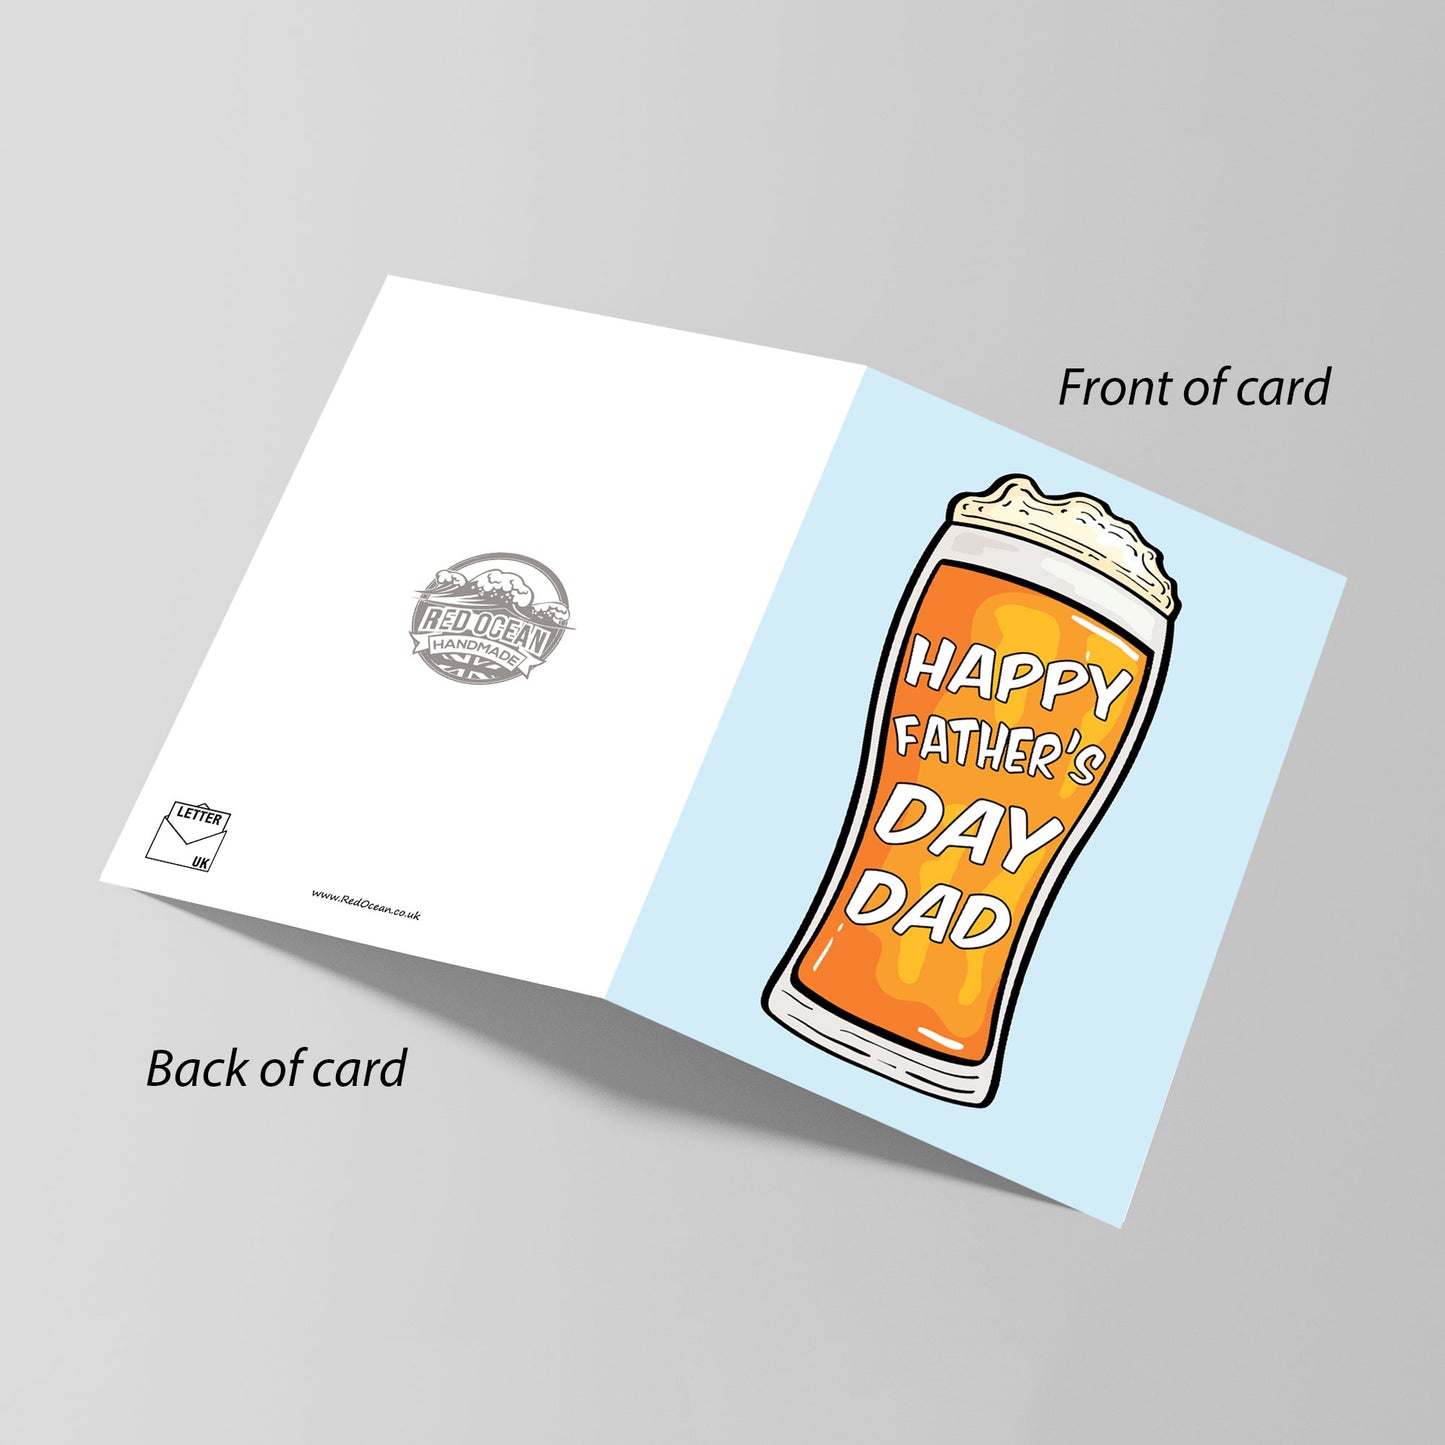 Novelty Happy Fathers Day Cards for Dad Father's Day Card Beer